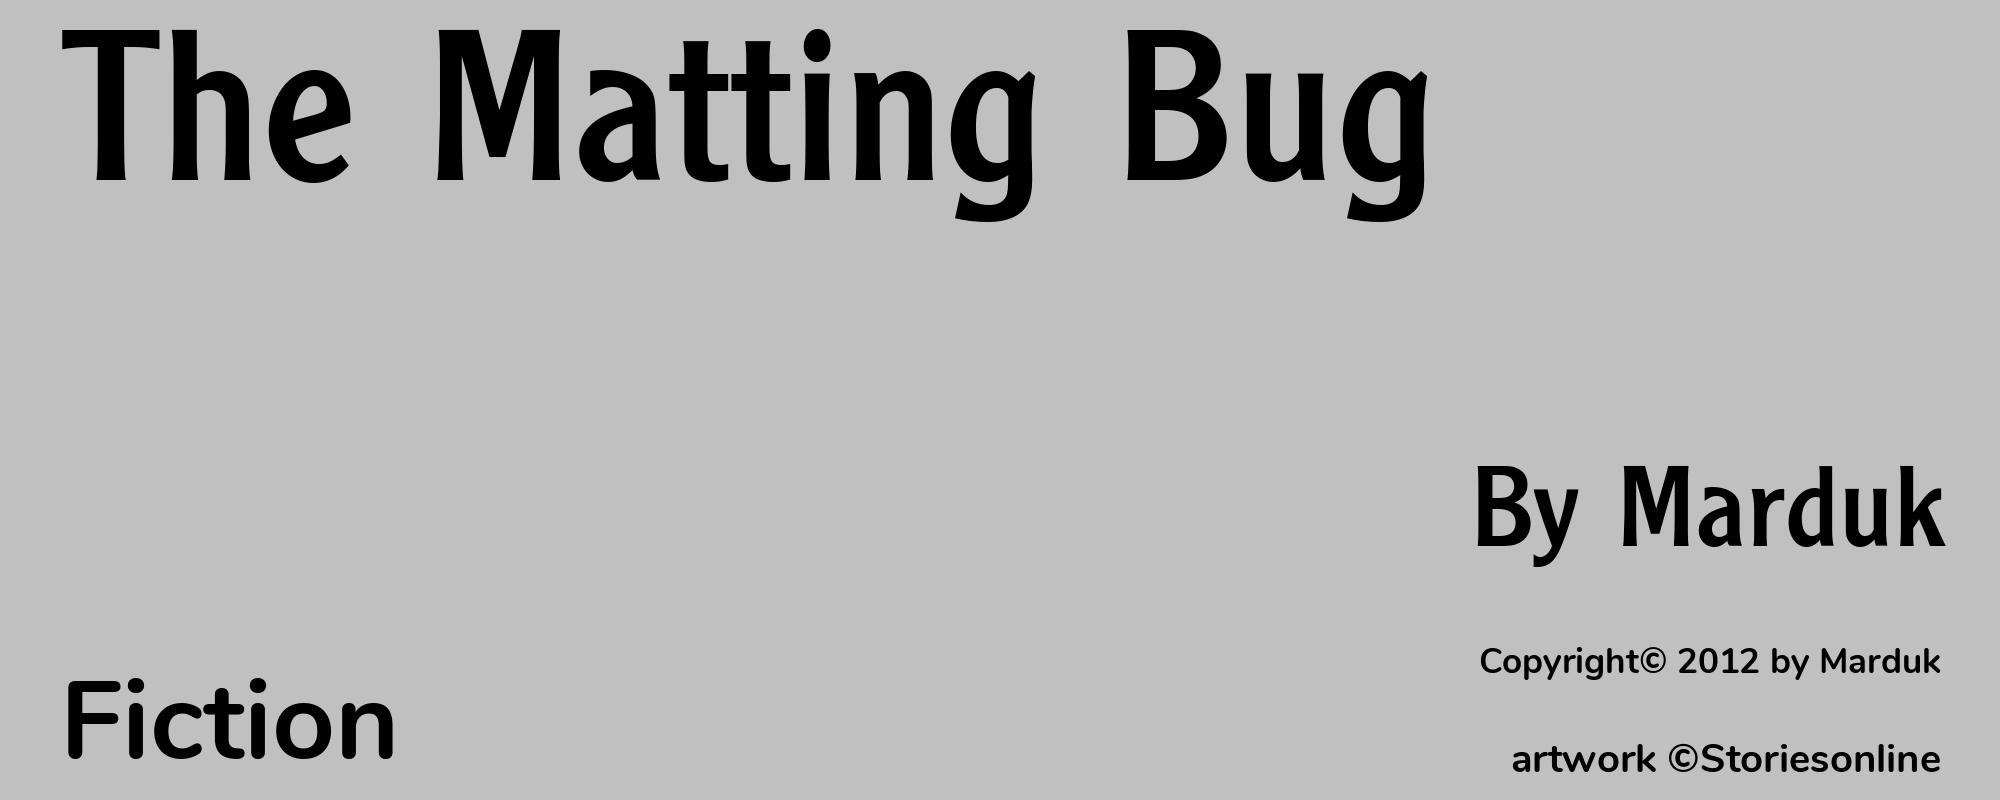 The Matting Bug - Cover